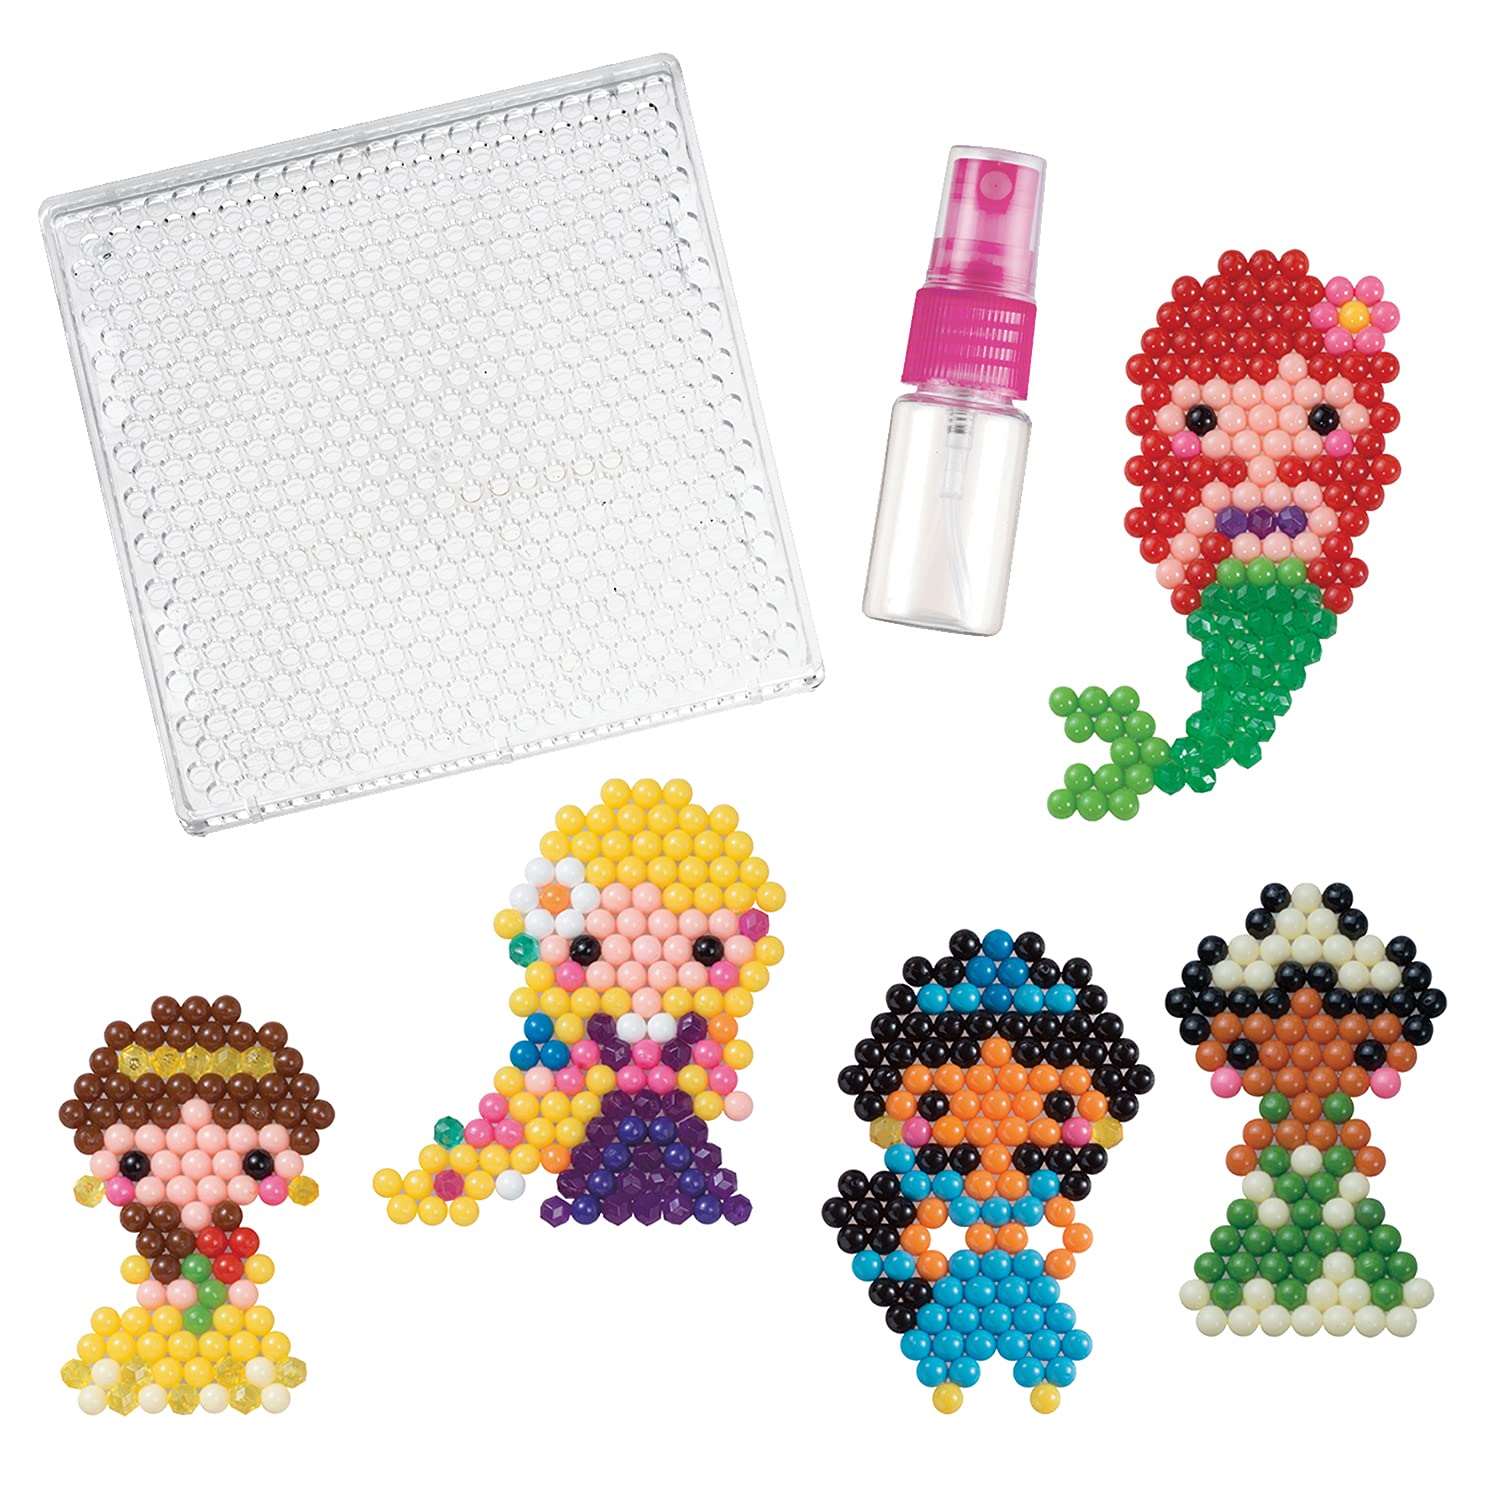 Aquabeads Disney Princess Character Set, Complete Arts & Crafts Kit for Children - over 600 Beads to create your favorite Disney Princess Characters - Hatke